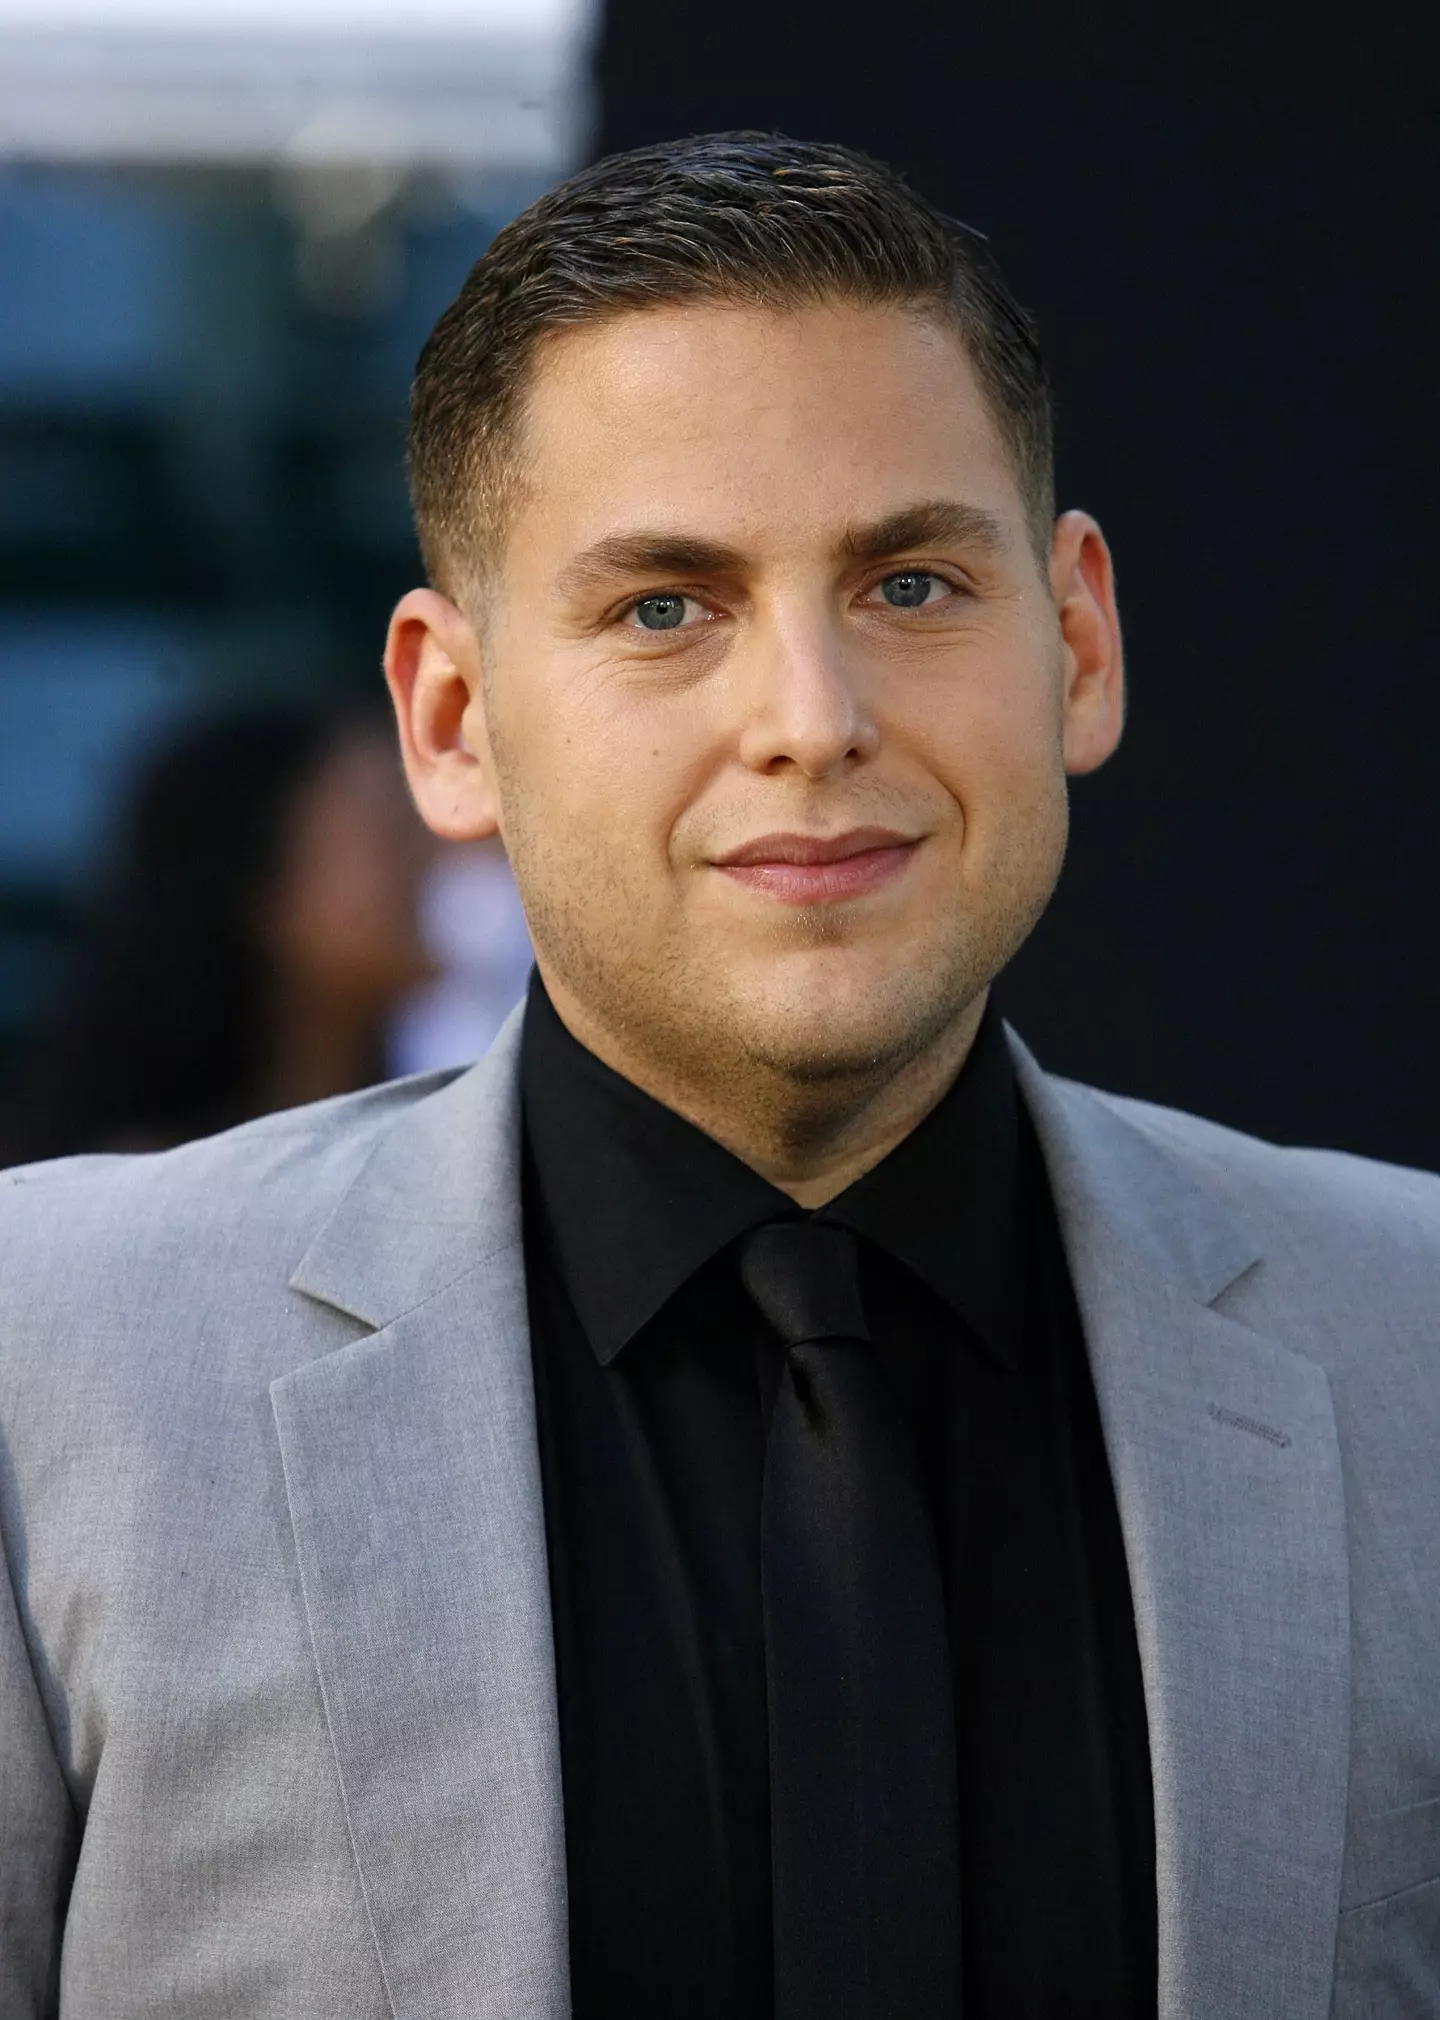 Jonah Hill has announced in a lengthy statement that he won’t be taking part in press tours for his upcoming films for the sake of his mental health.